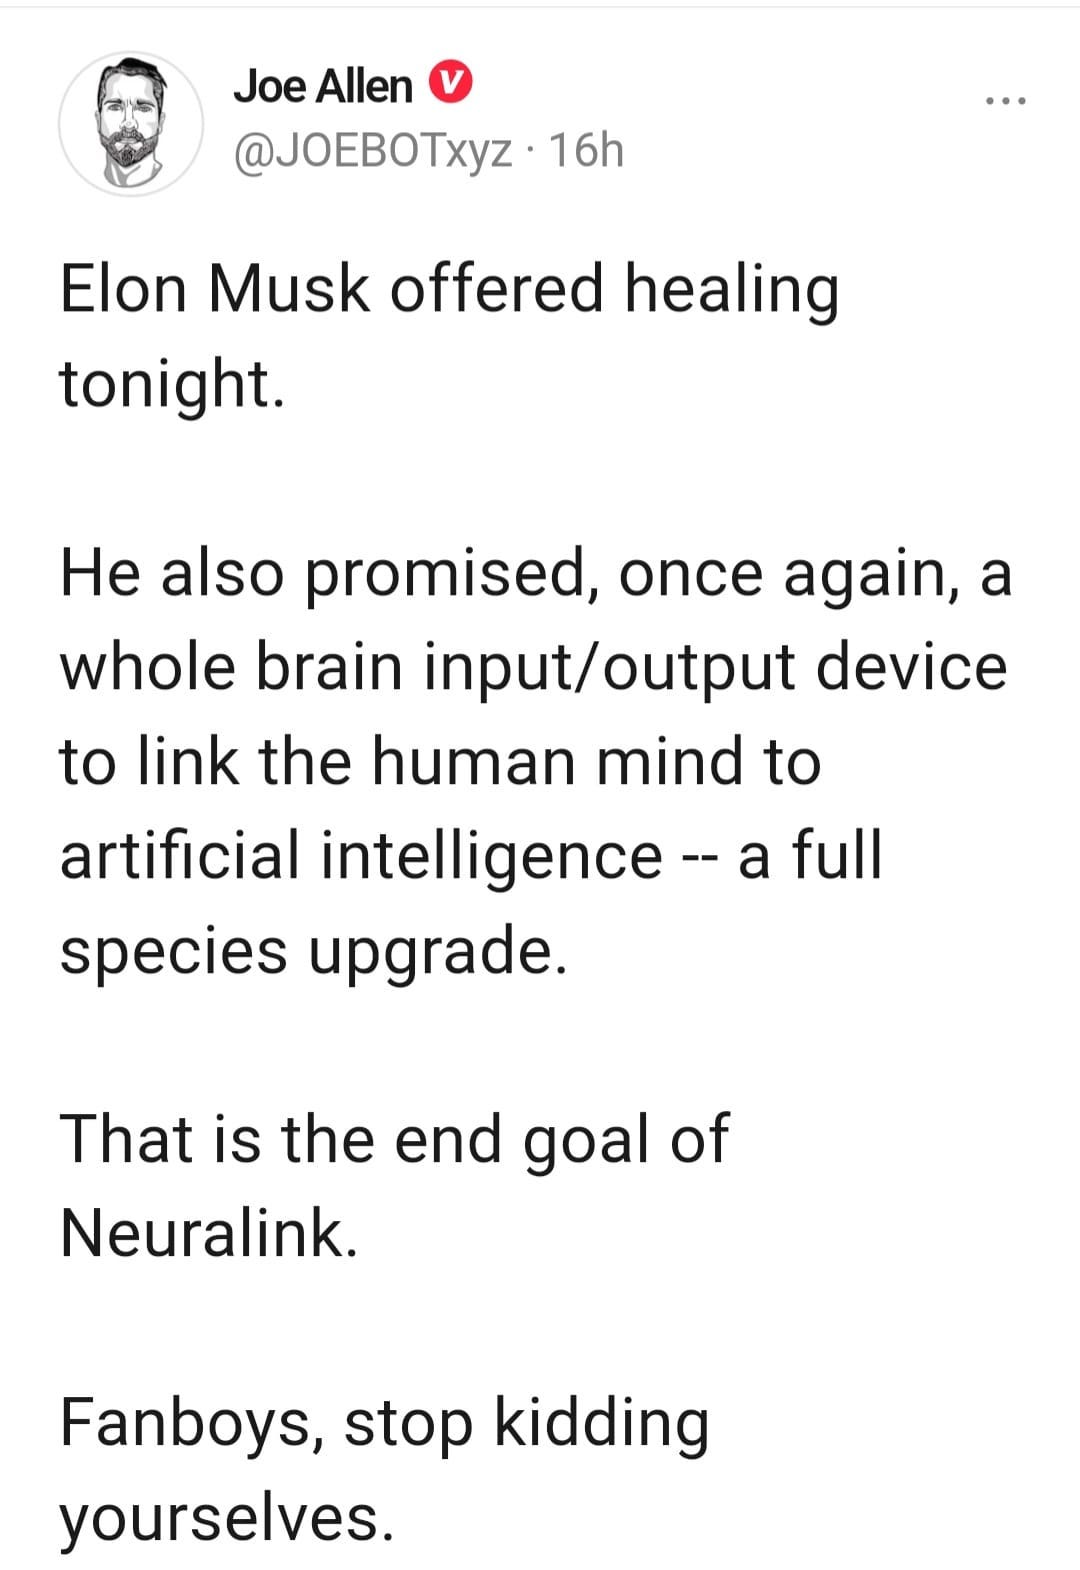 May be an image of text that says 'Joe Allen @JOEBOTxyz 16h Elon Musk offered healing tonight. He also promised, once again, a whole brain input/output device to link the human mind to artificial intelligence species upgrade. a full That is the end goal of of Neuralink. Fanboys, stop kidding yourselves.'